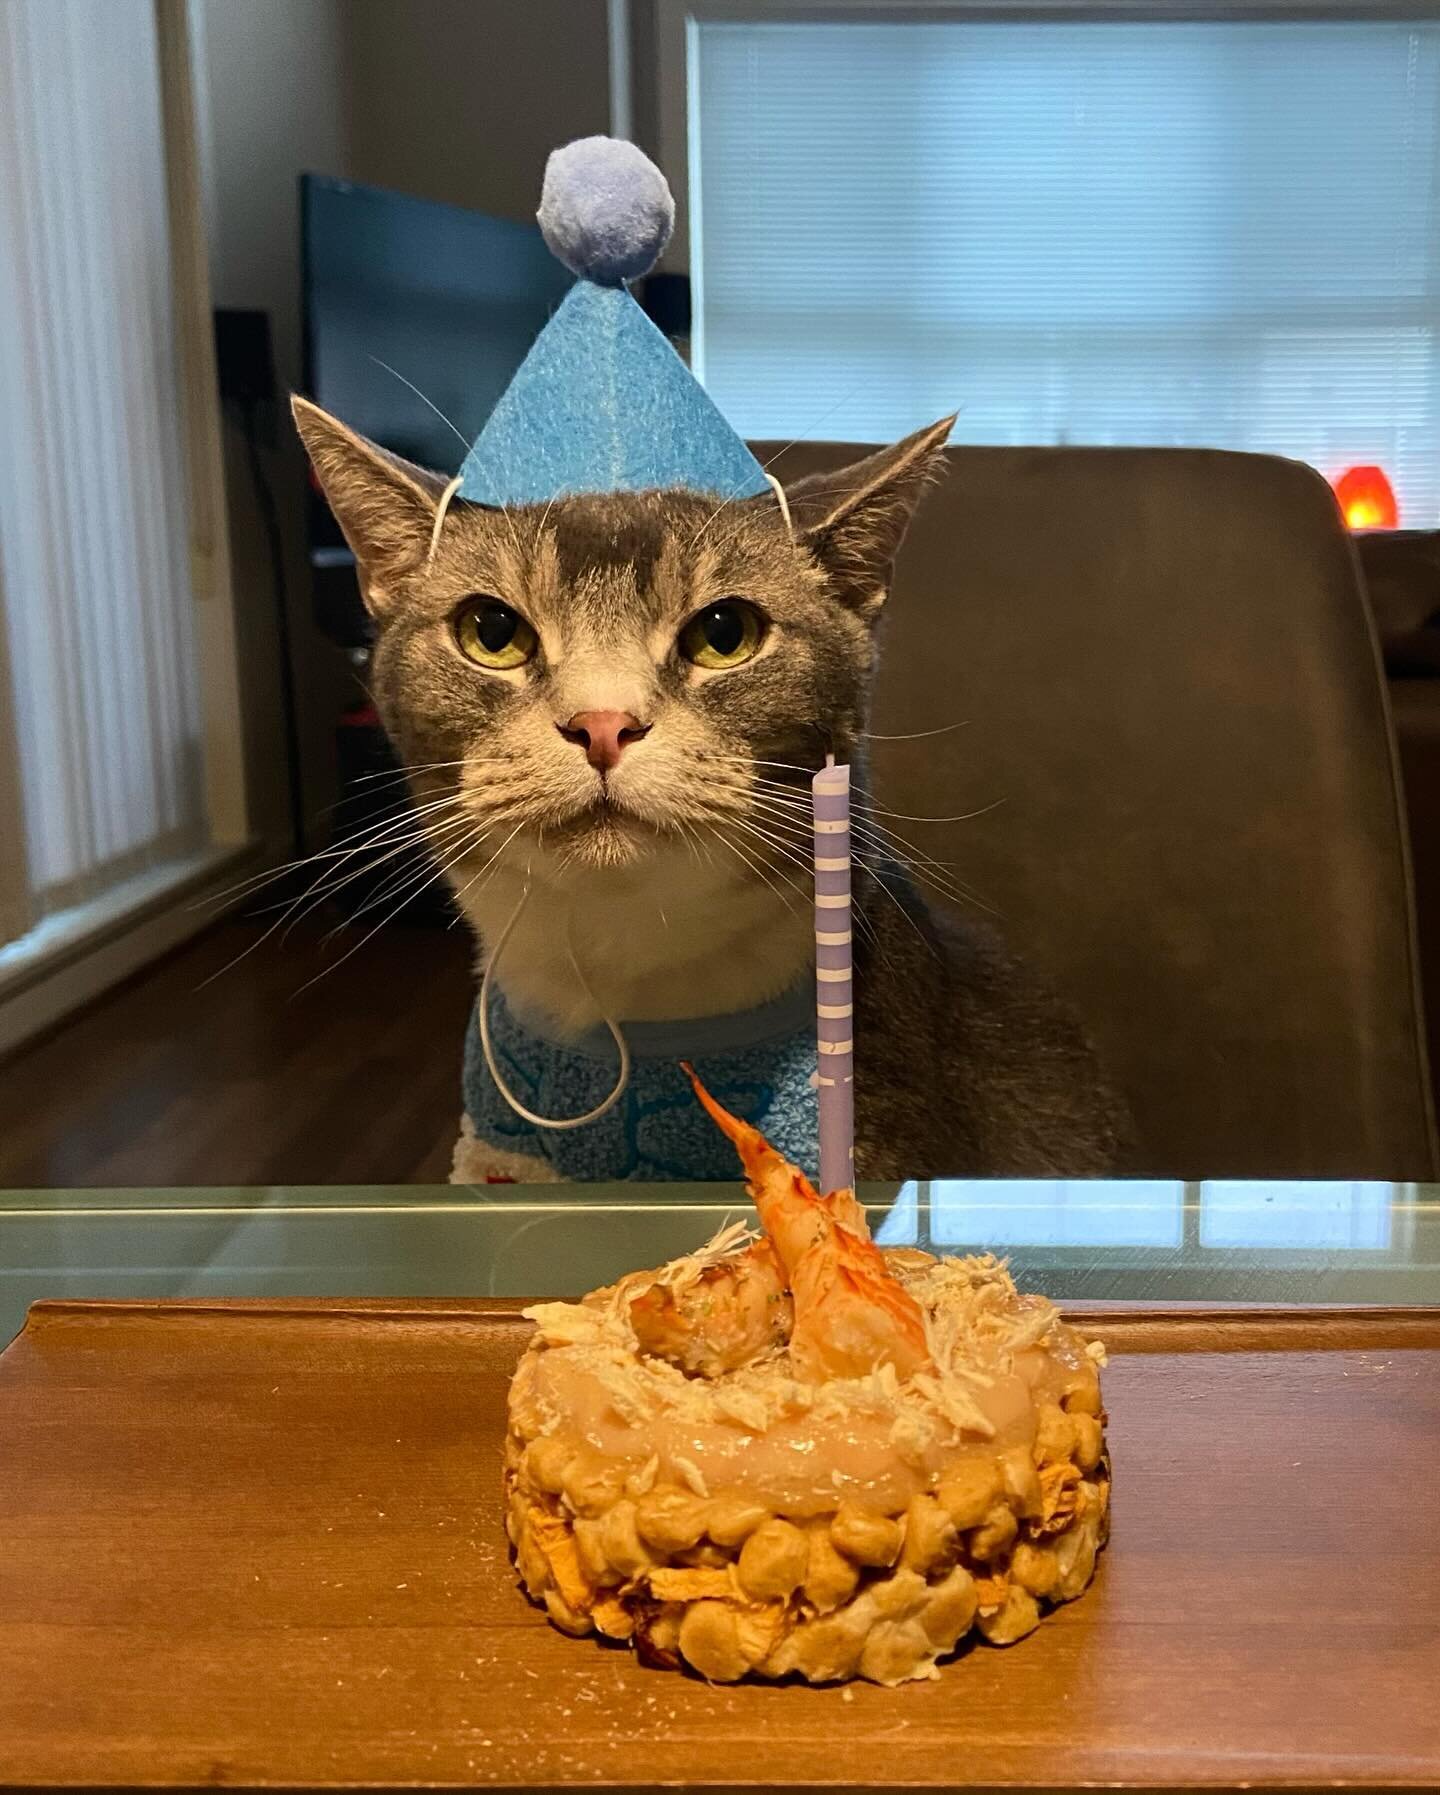 My handsome little man turns 6 tomorrow! 

We celebrated with a three course meal (cat-friendly versions of) - lobster bisque, salmon nigiri, and birthday cake. Meal details can be found in stories/highlights. We&rsquo;ve spent the year experimenting